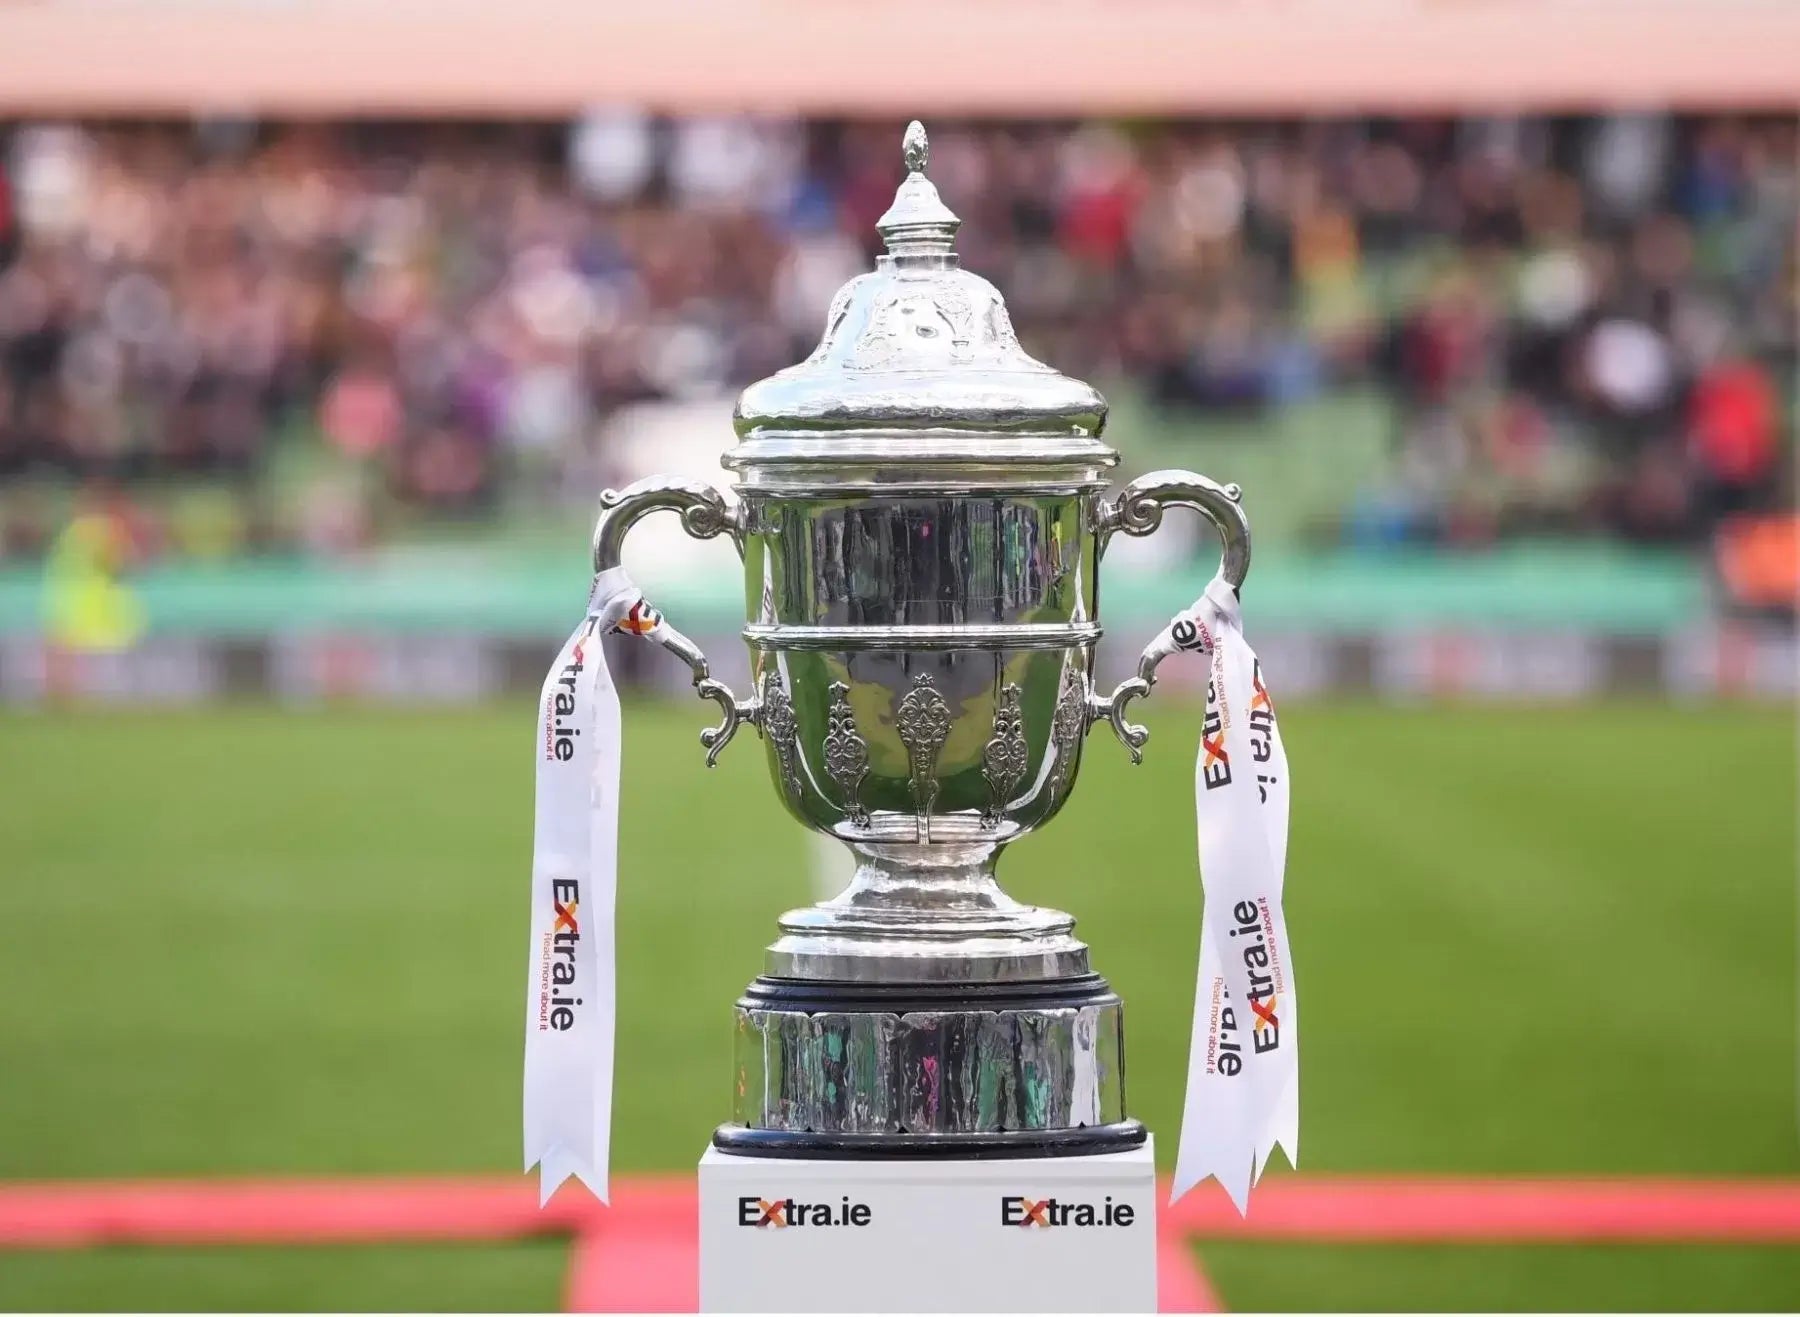 City home to St. Pat's in FAI Cup